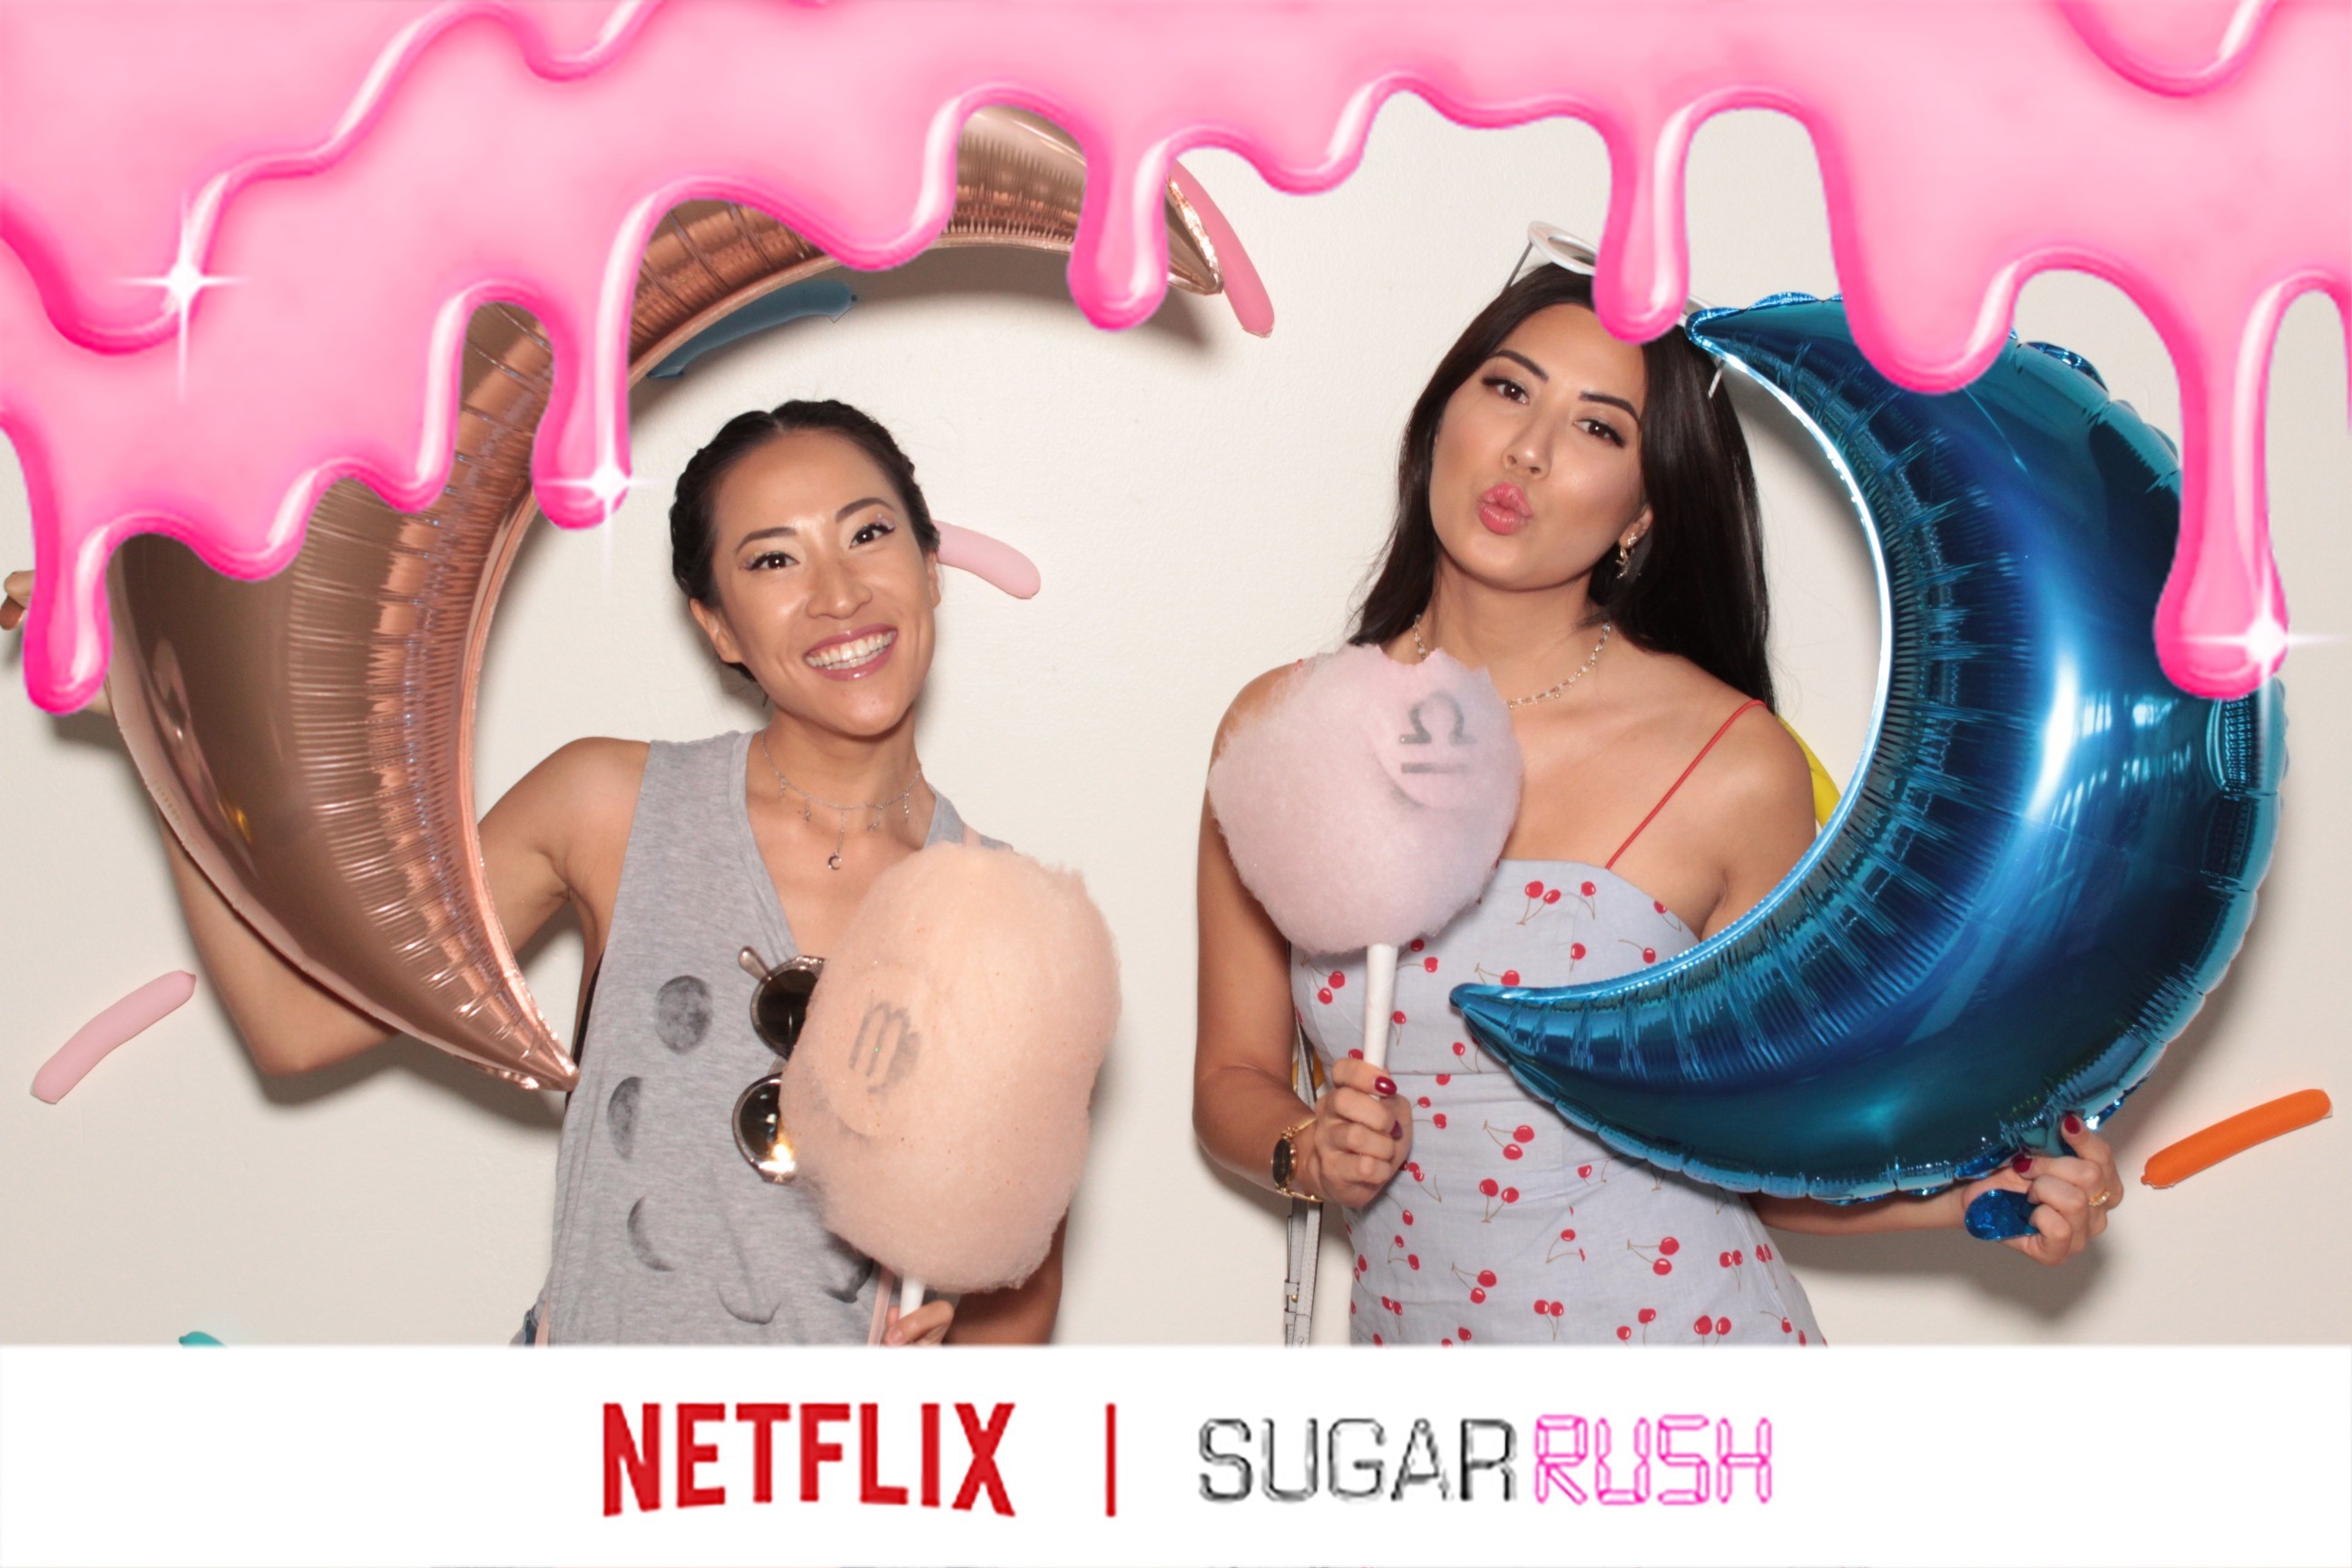 a photo from a Netflix event by photo booth rental Los Angeles company Maple Leaf Photo Booths